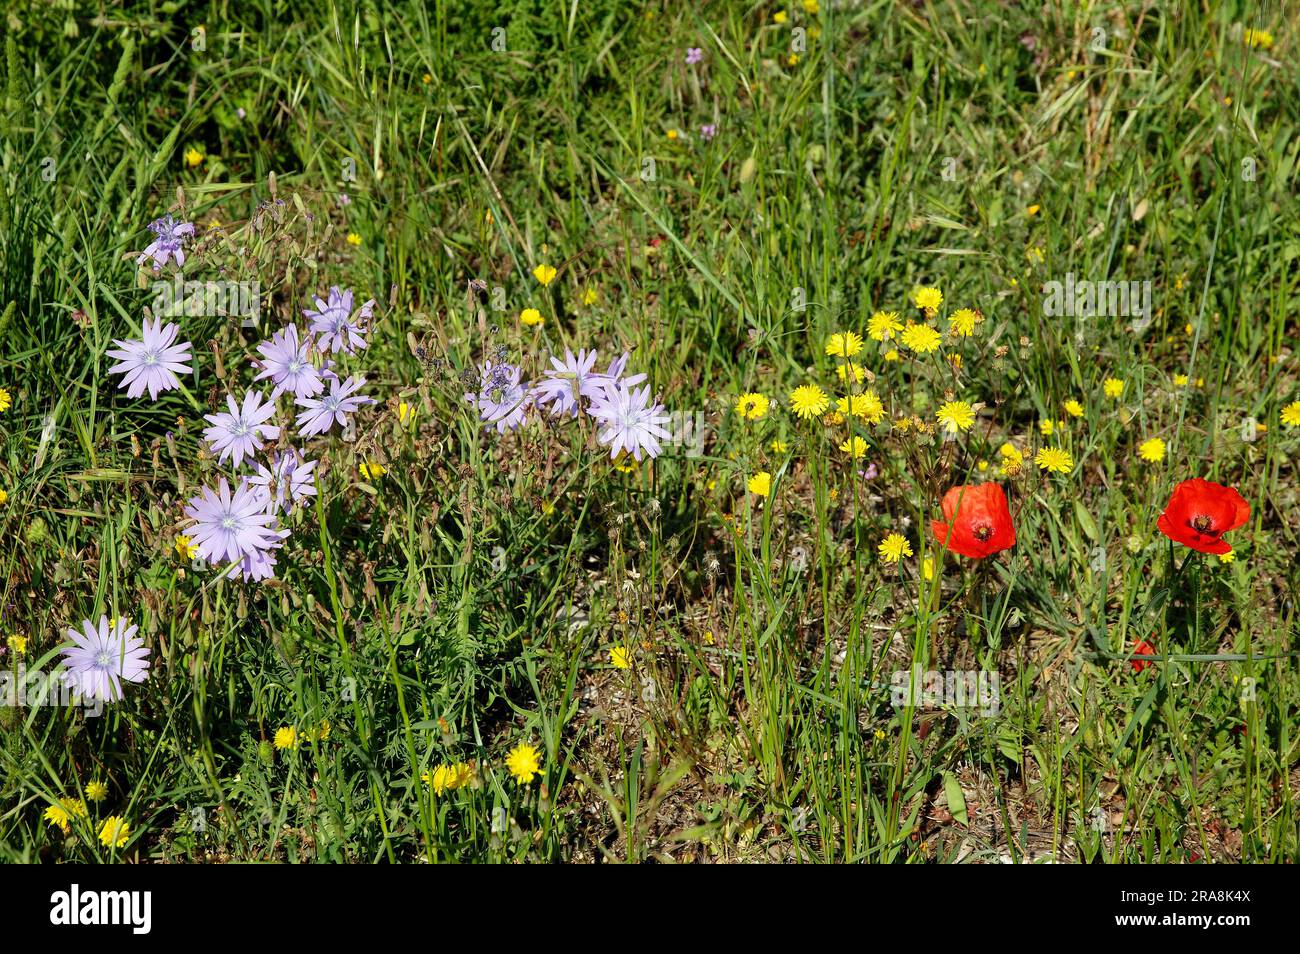 Blue lettuce (Lactuca perennis) and poppy flowers (Papaver rhoeas), Provence, southern France Stock Photo